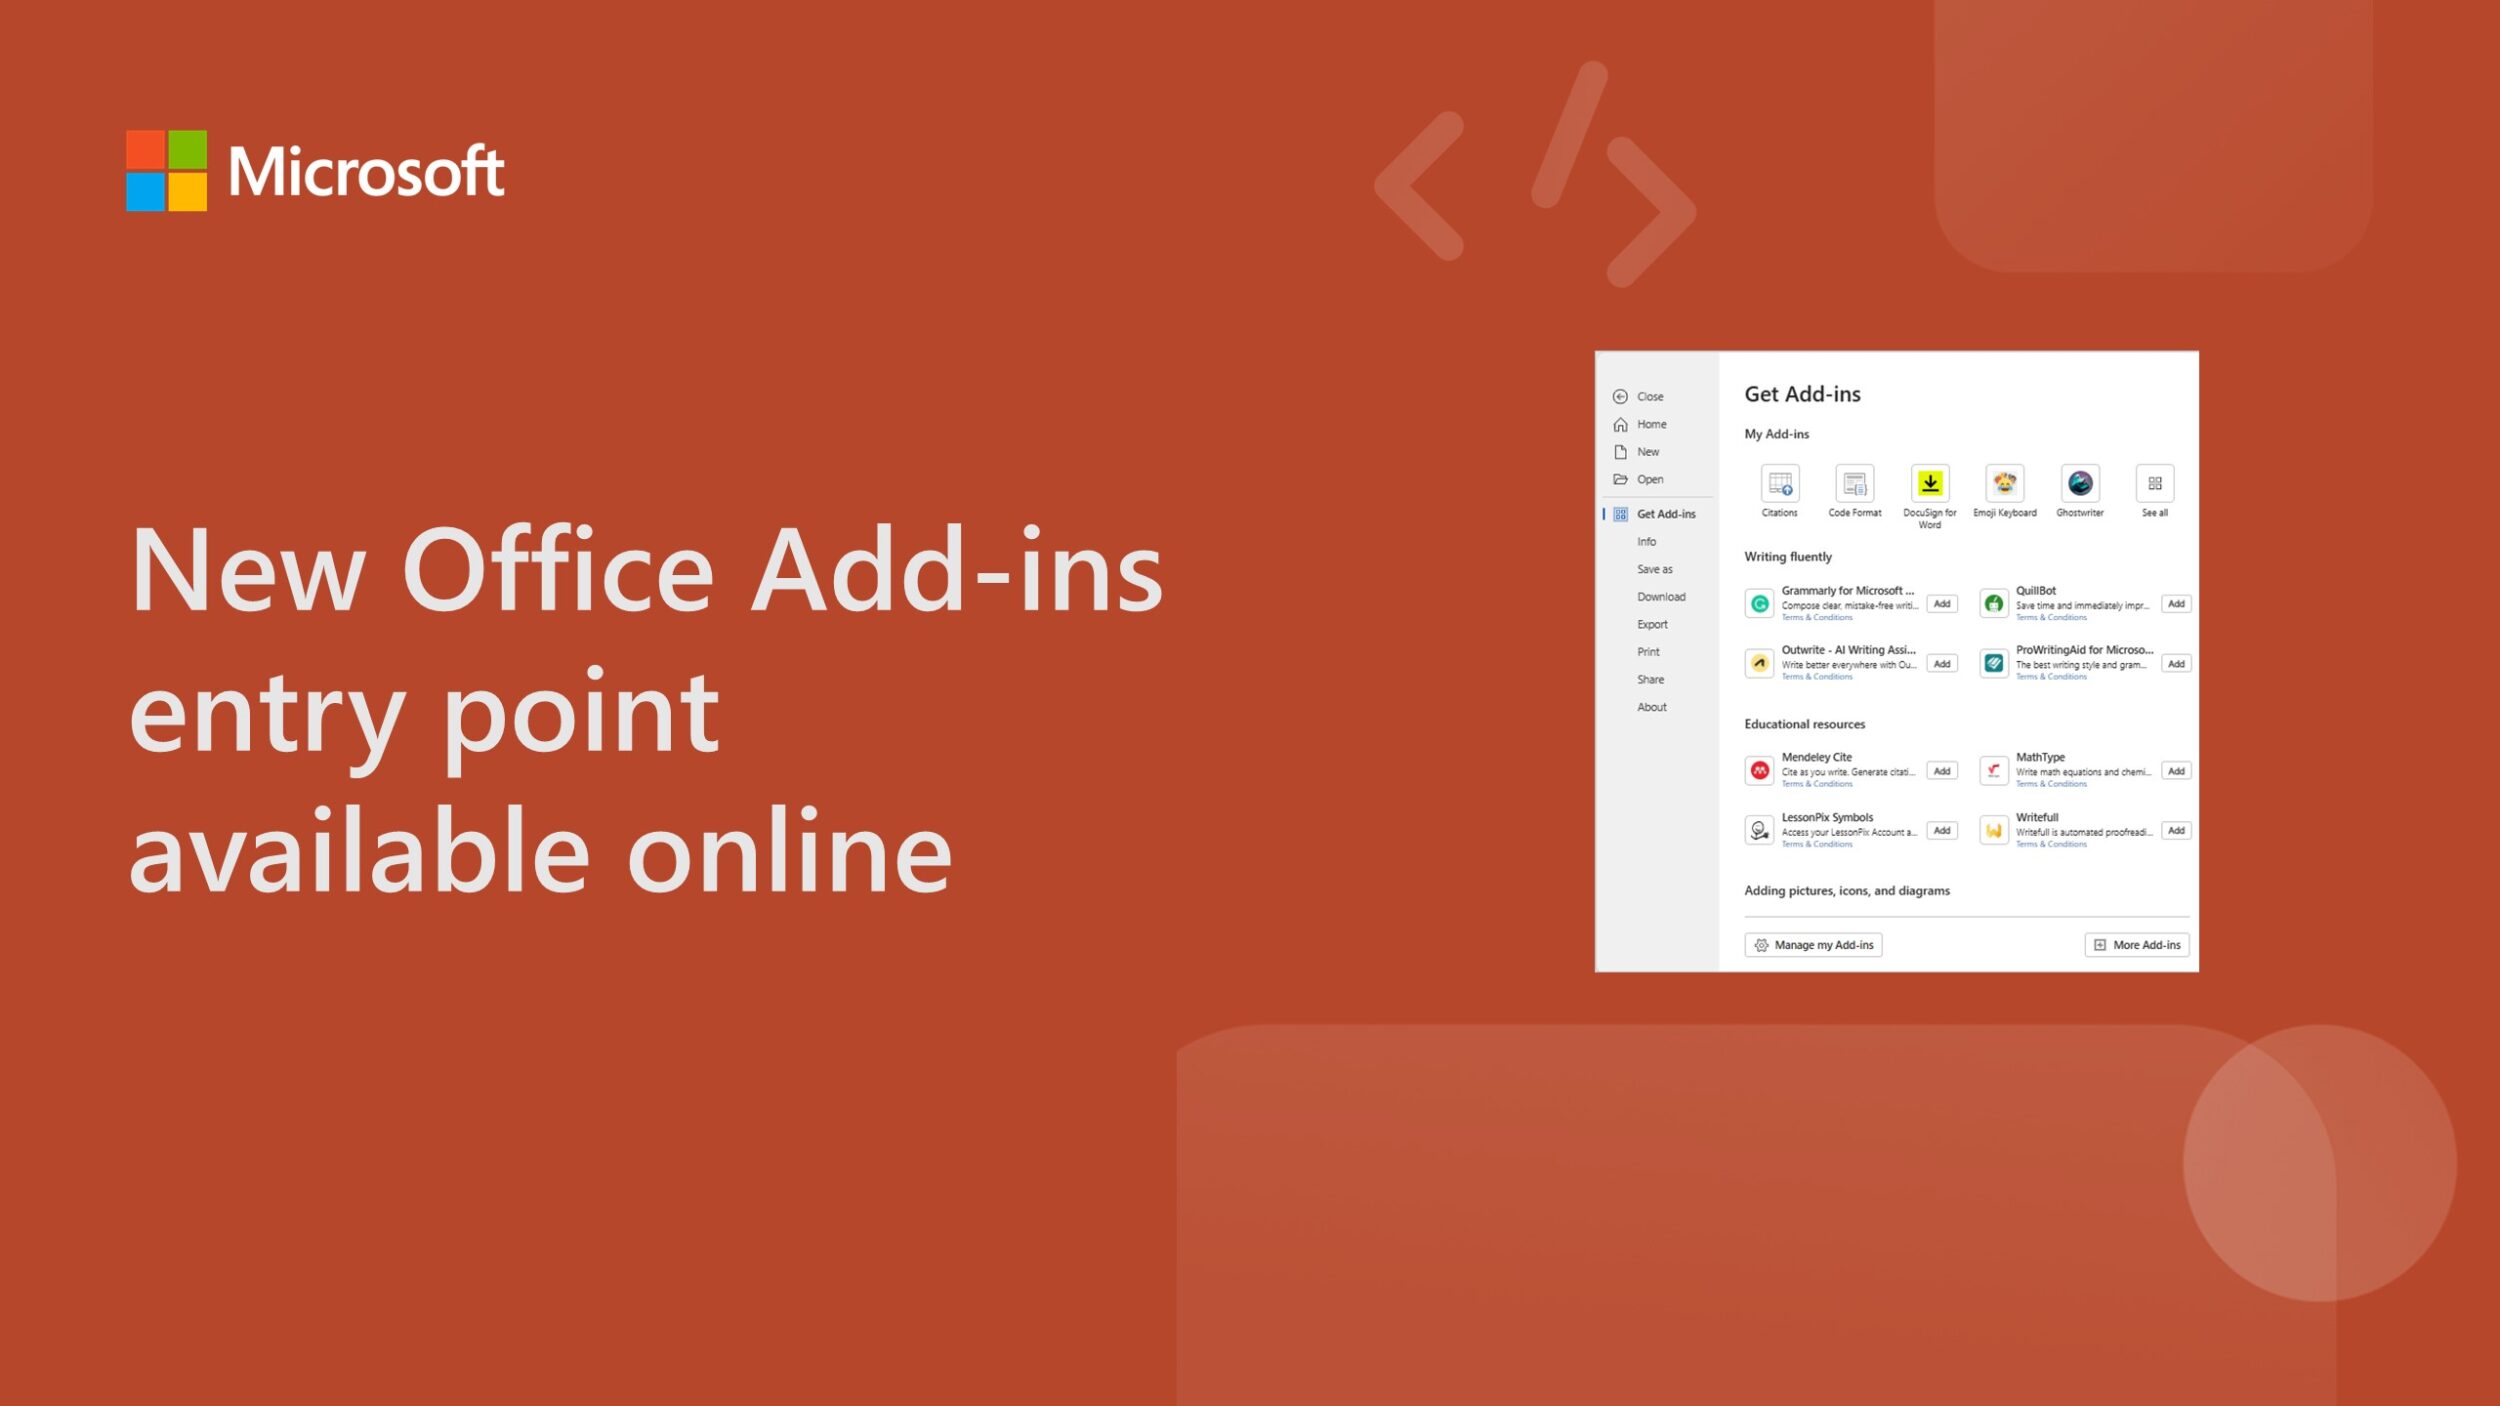 New Office Add-ins entry point available online